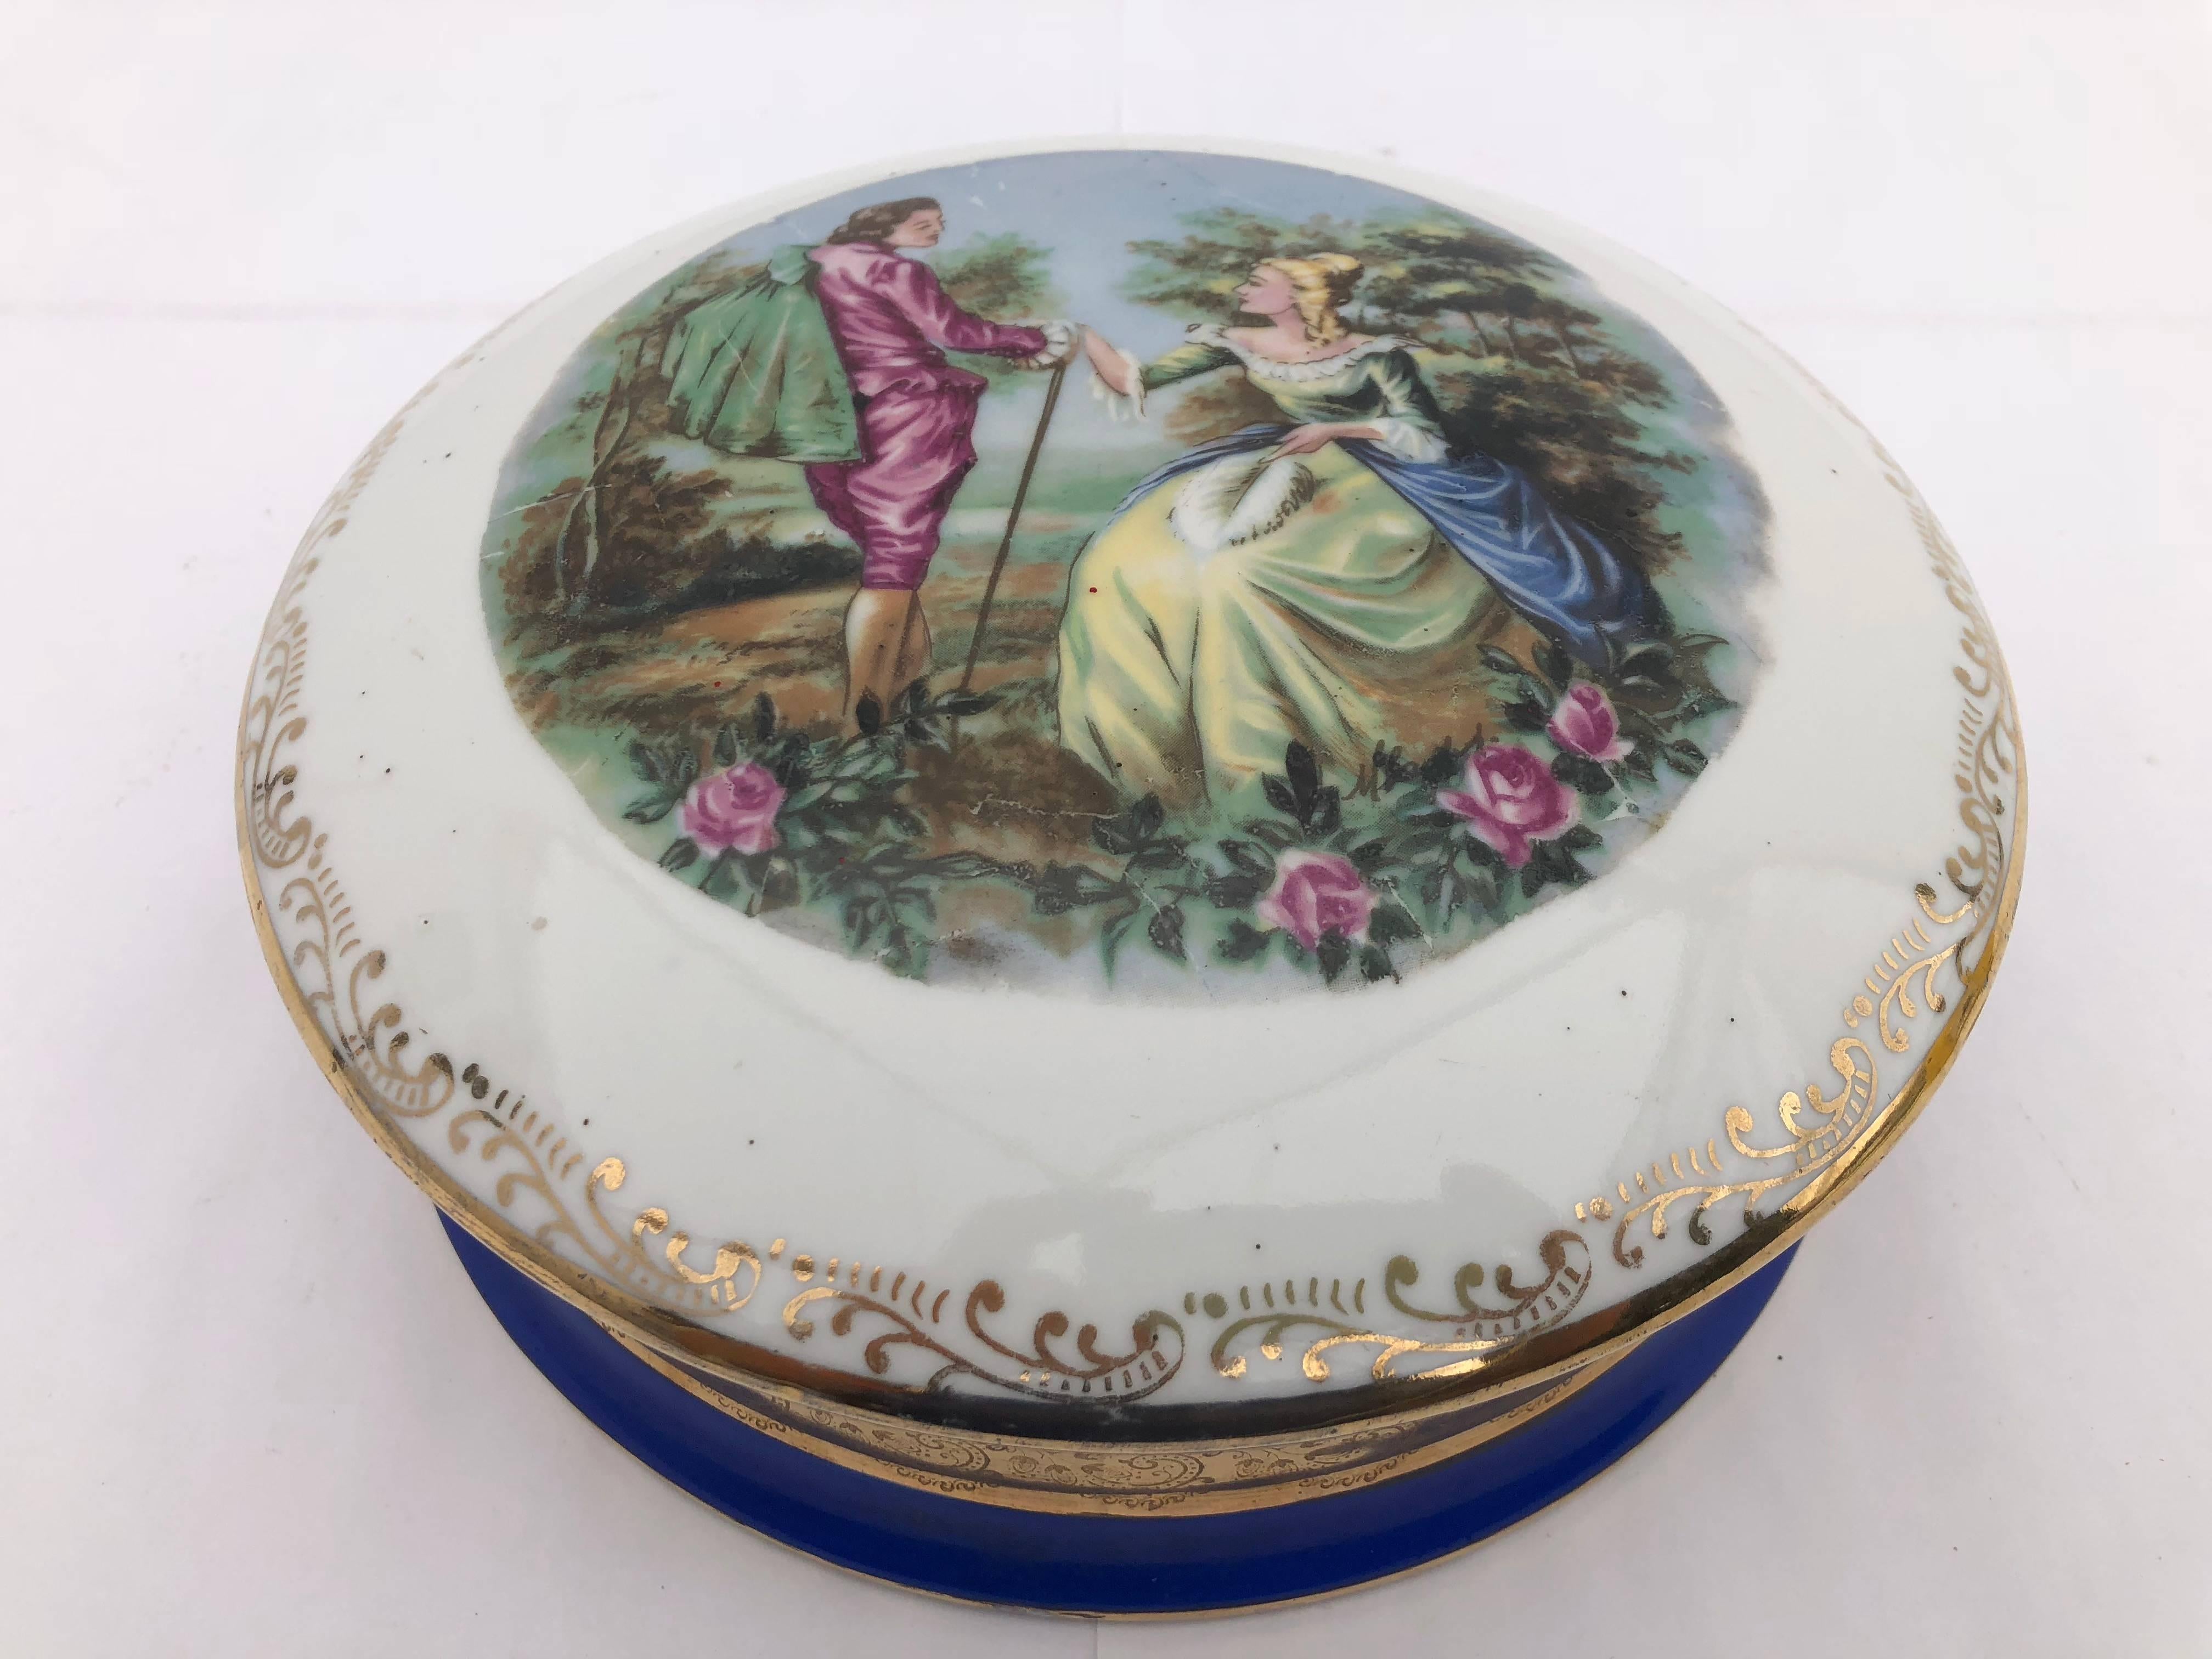 This is a lovely French Limoges porcelain candy box with royal blue and gold trim, featuring a romantic scene inspired by Fragonard's paintings. These porcelain boxes used to be offered as a gift filled with candies or sugared almonds (dragées).